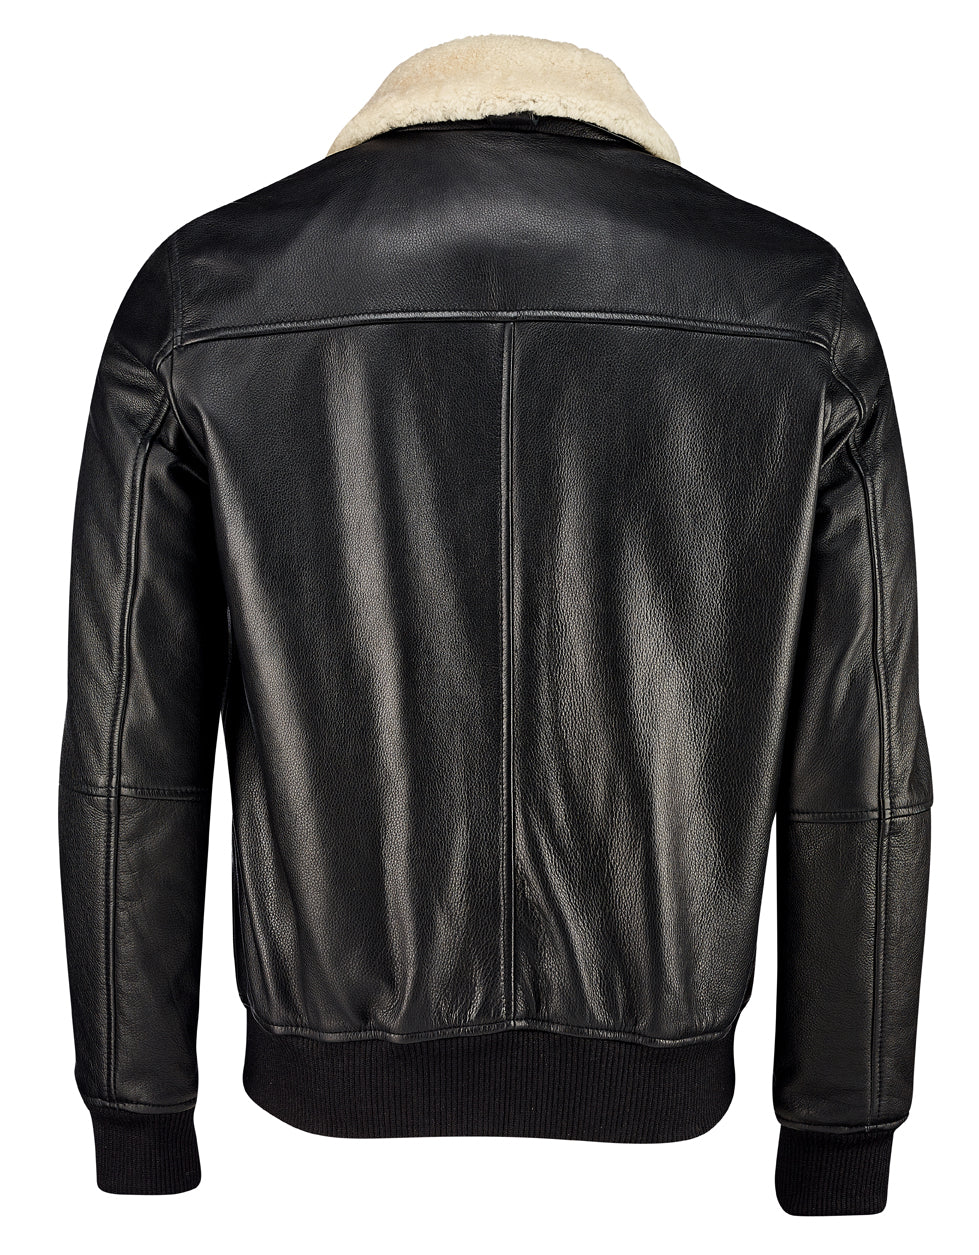 American Bomber Leather Jacket - The Long Voyage – TheLongVoyage